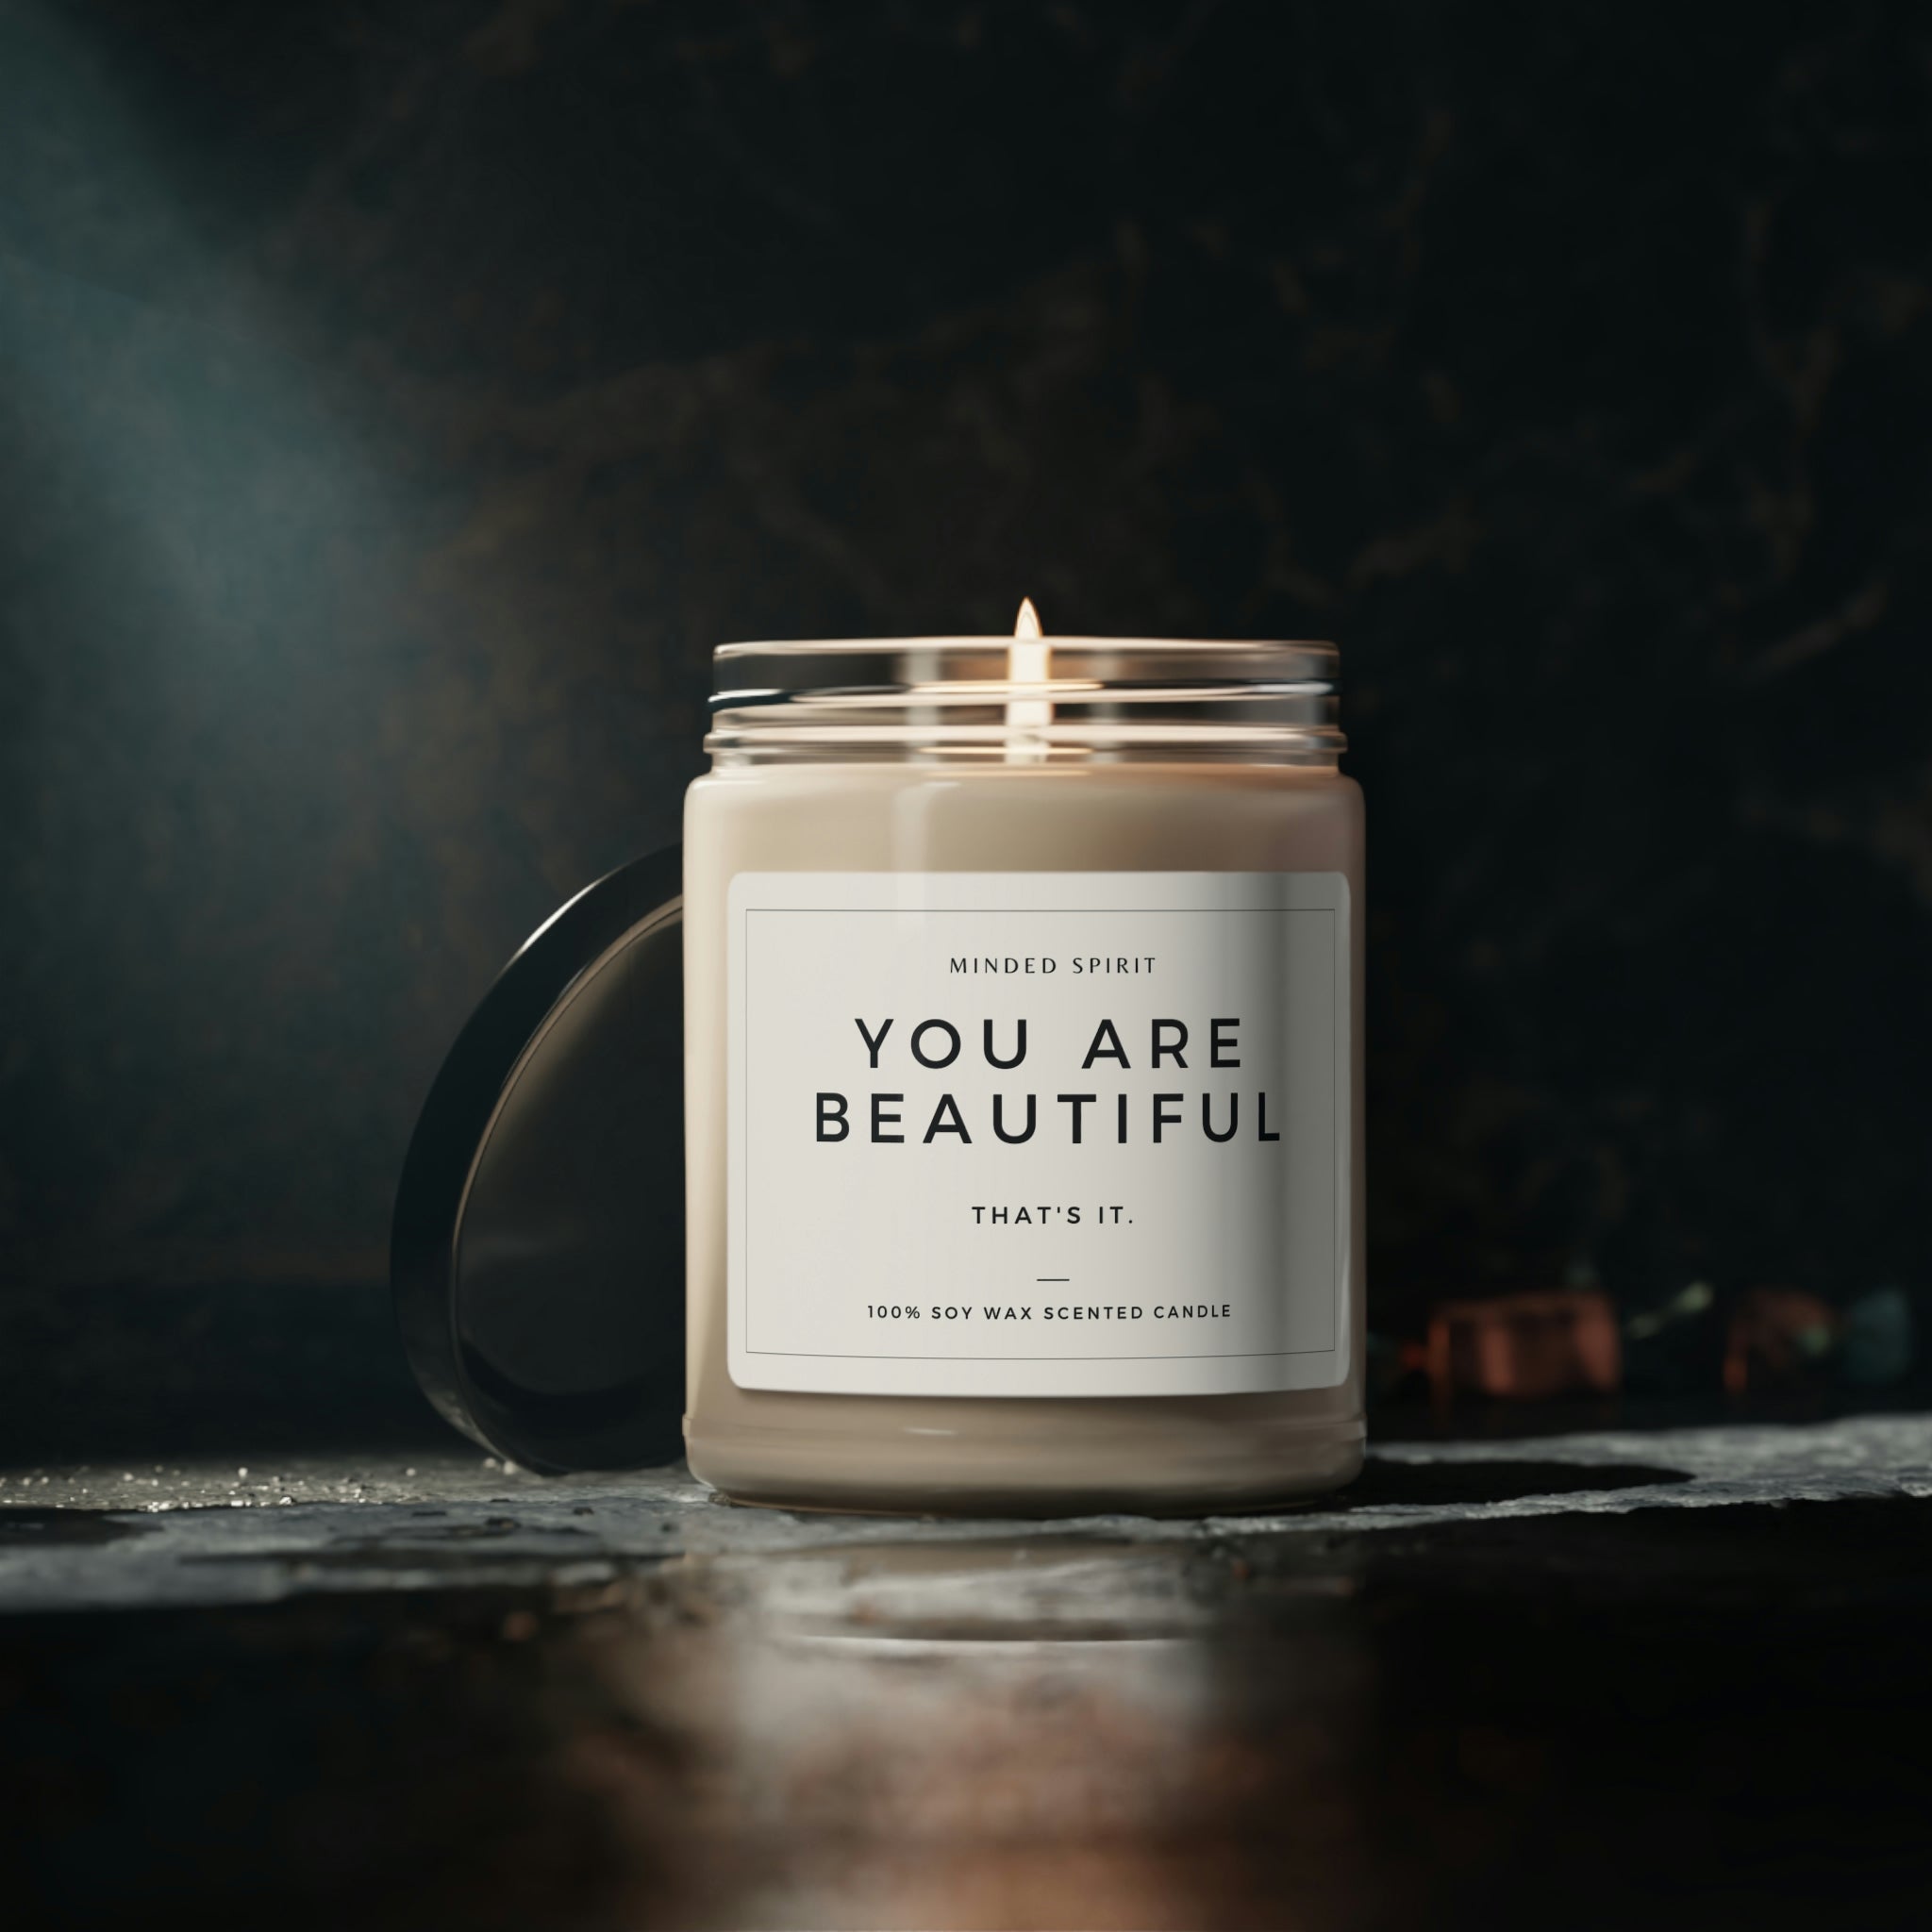 You Are Beautiful Sassy Self-Help Scented Candle